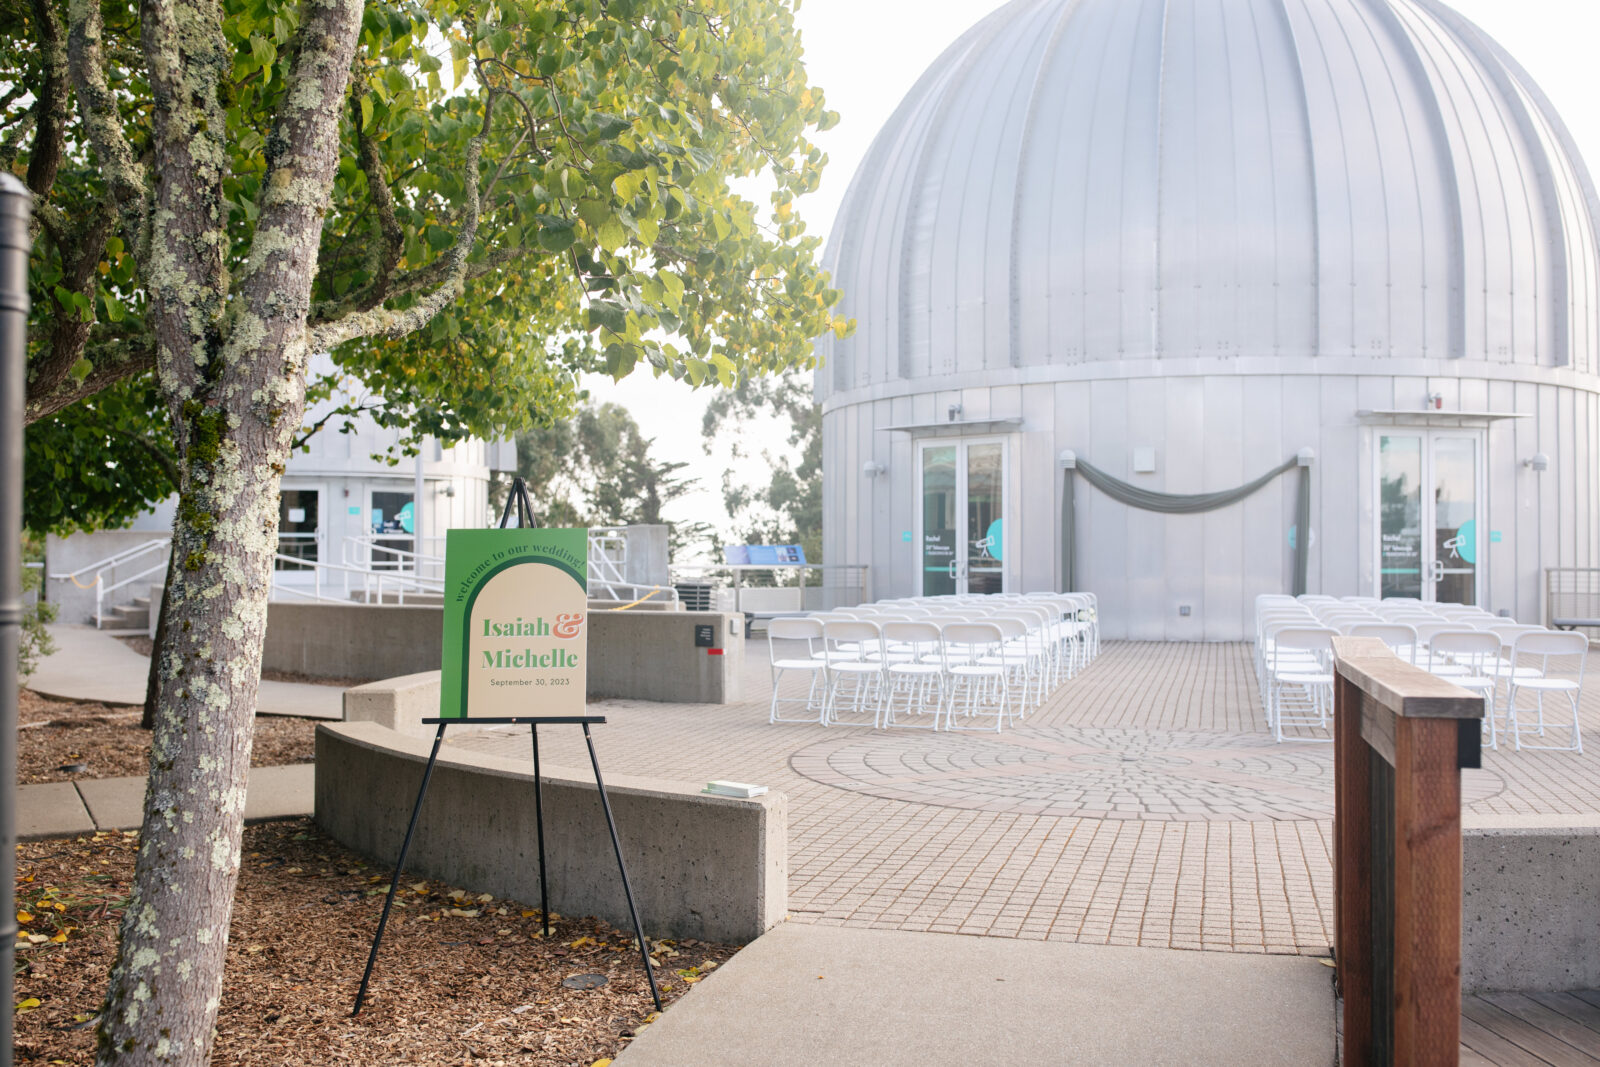 Wedding at Chabot Space & Science Center